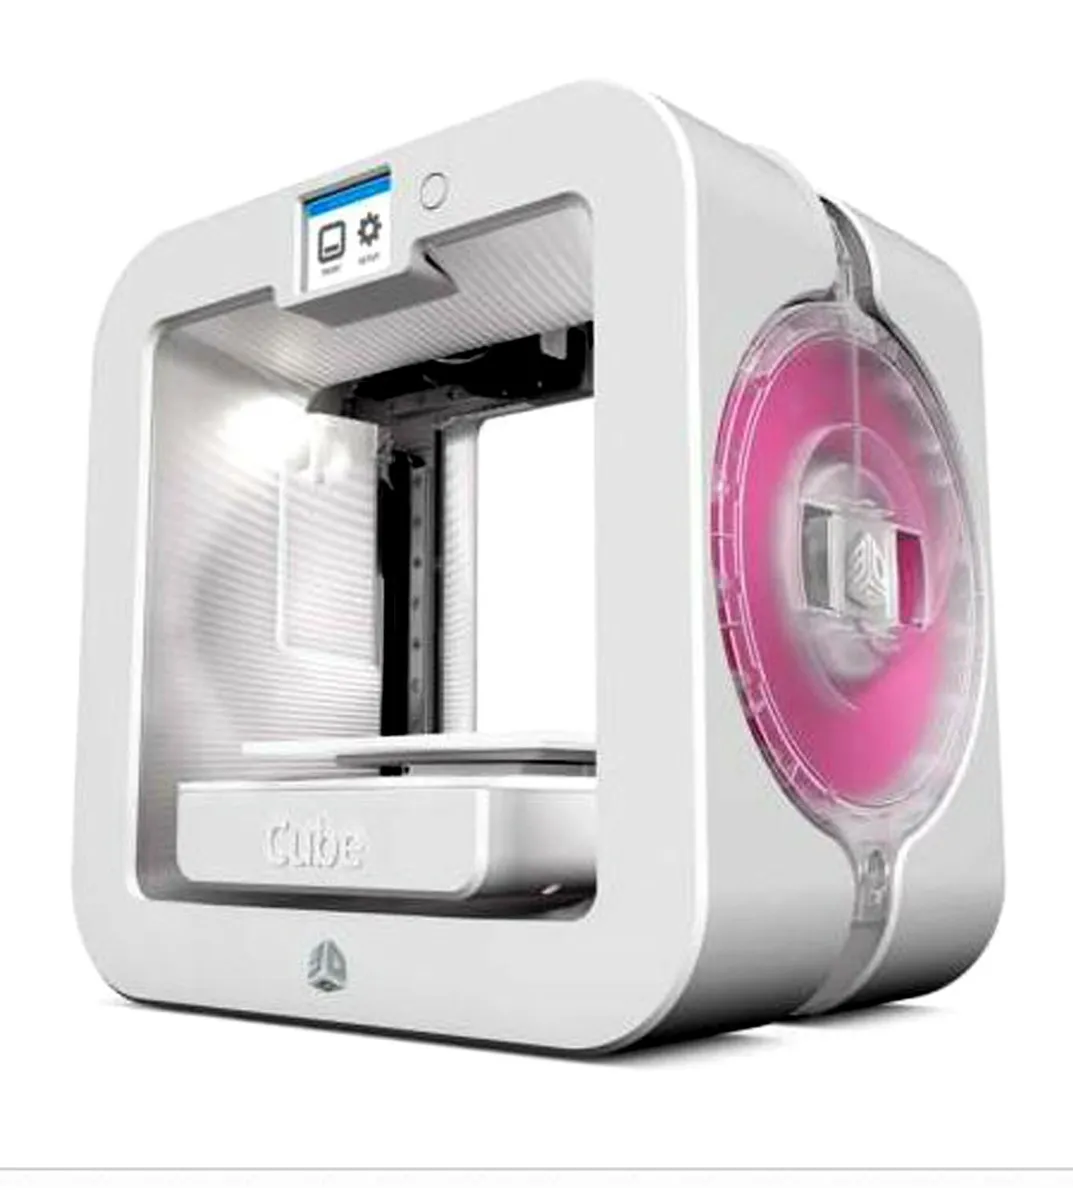 Brand New CUBE 3D Systems Wireless Printer, 3rd Generation 391100 White